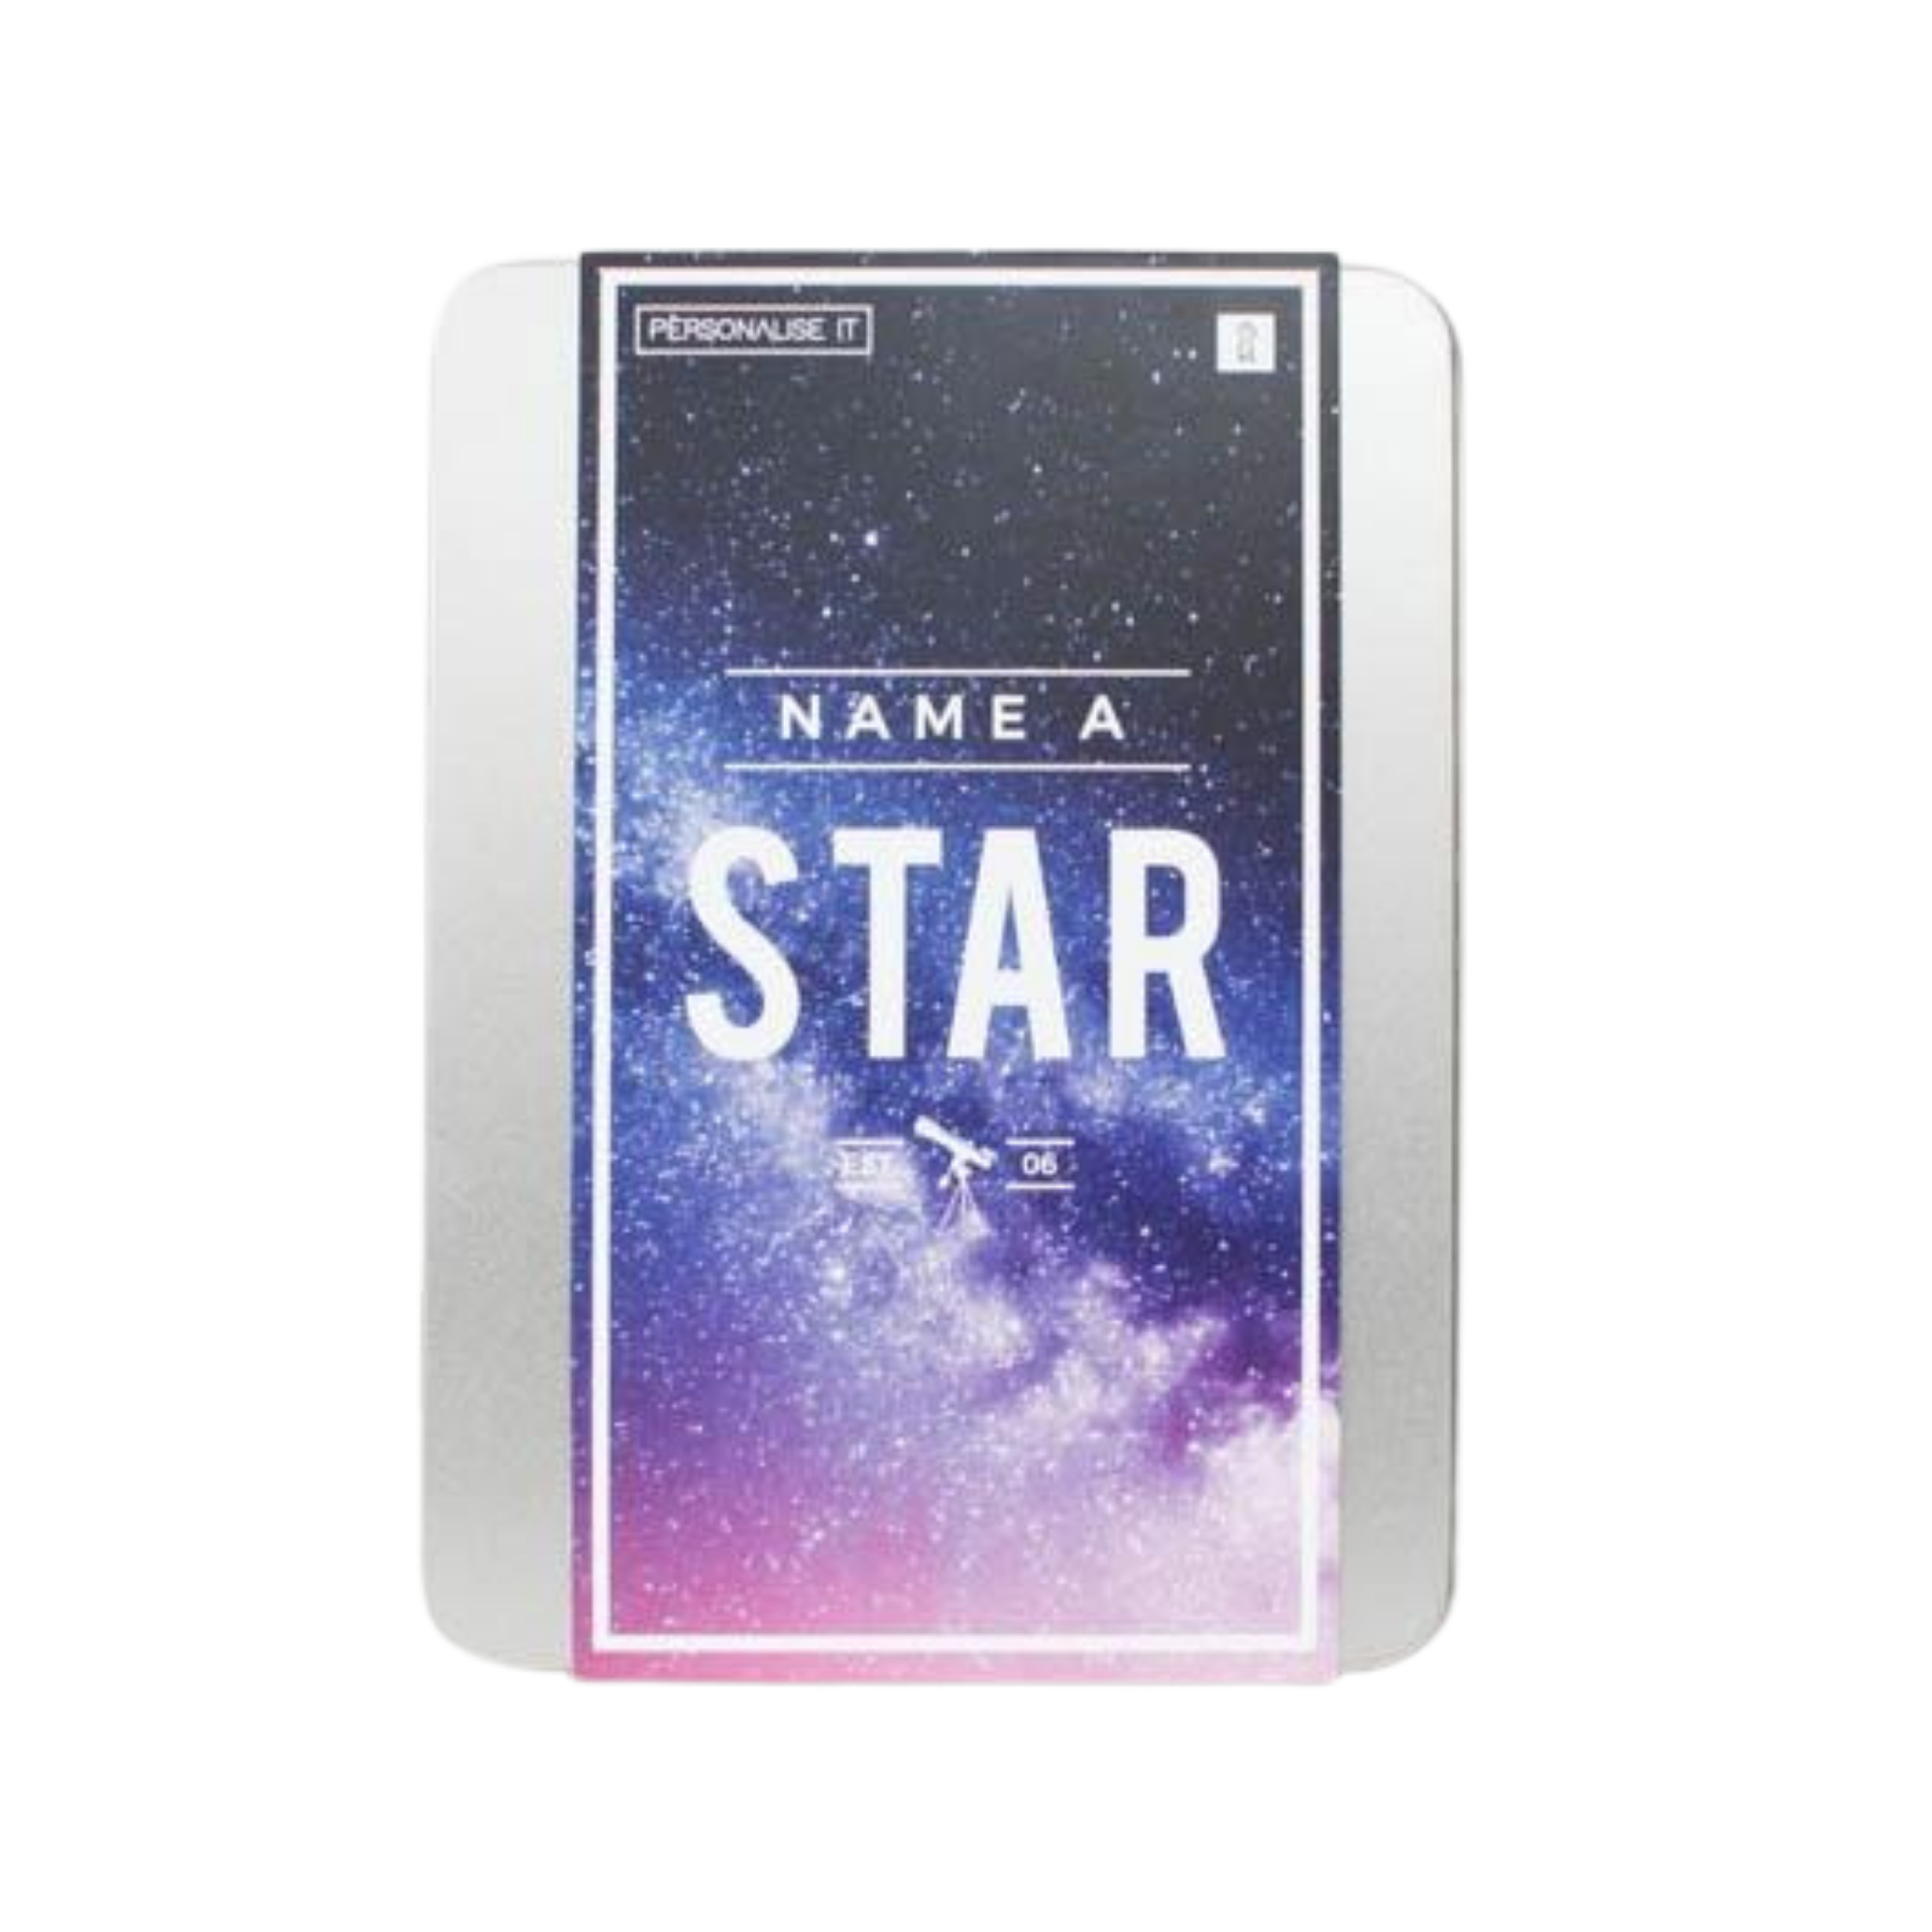 Our Name a Star Gift Sets - Buy a Star for someone special today